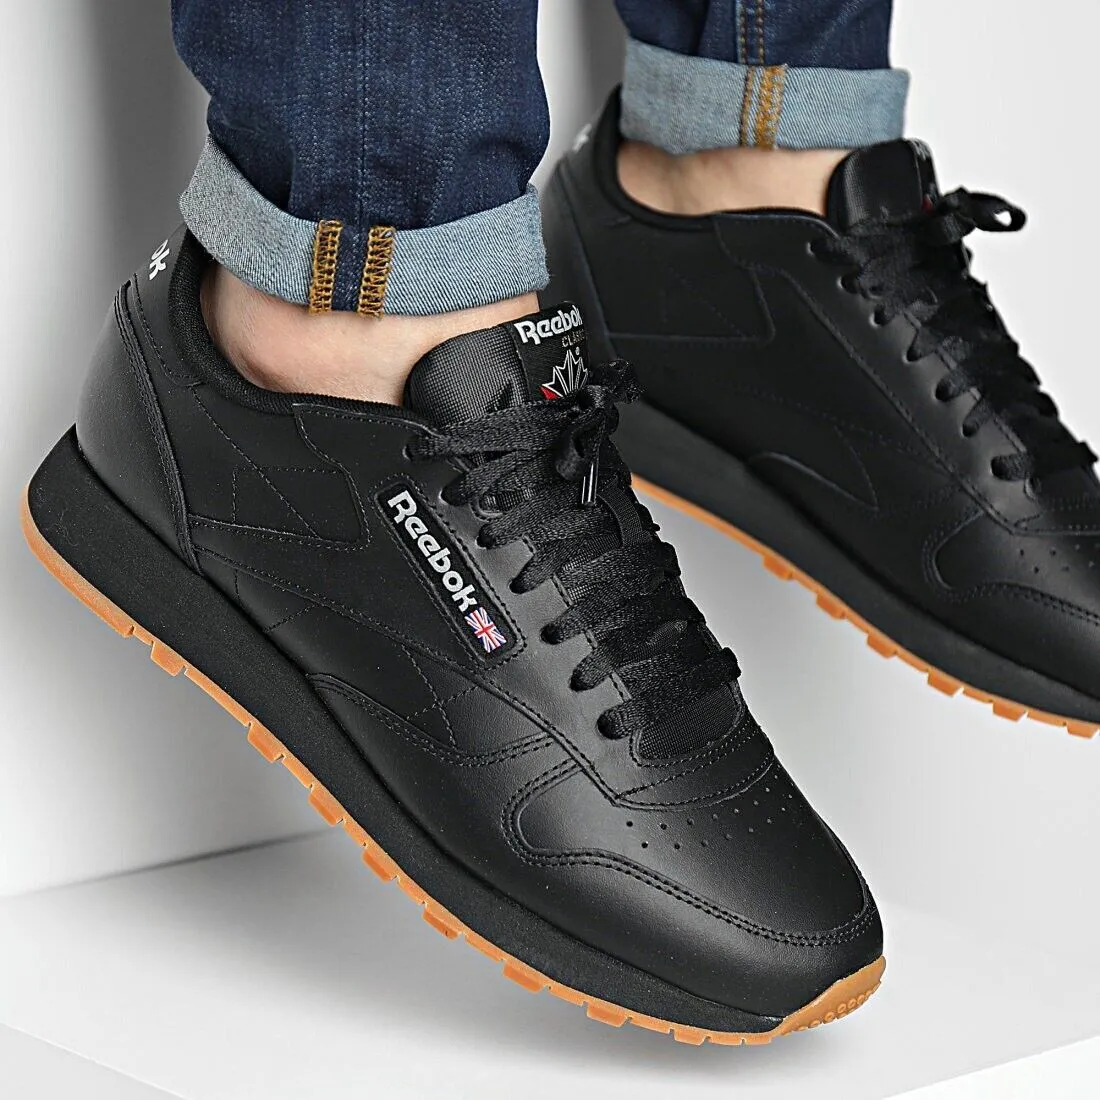 Black 8 Leather eBay Reebok 13 - Shoes | Sneakers Gum Classic Sizes